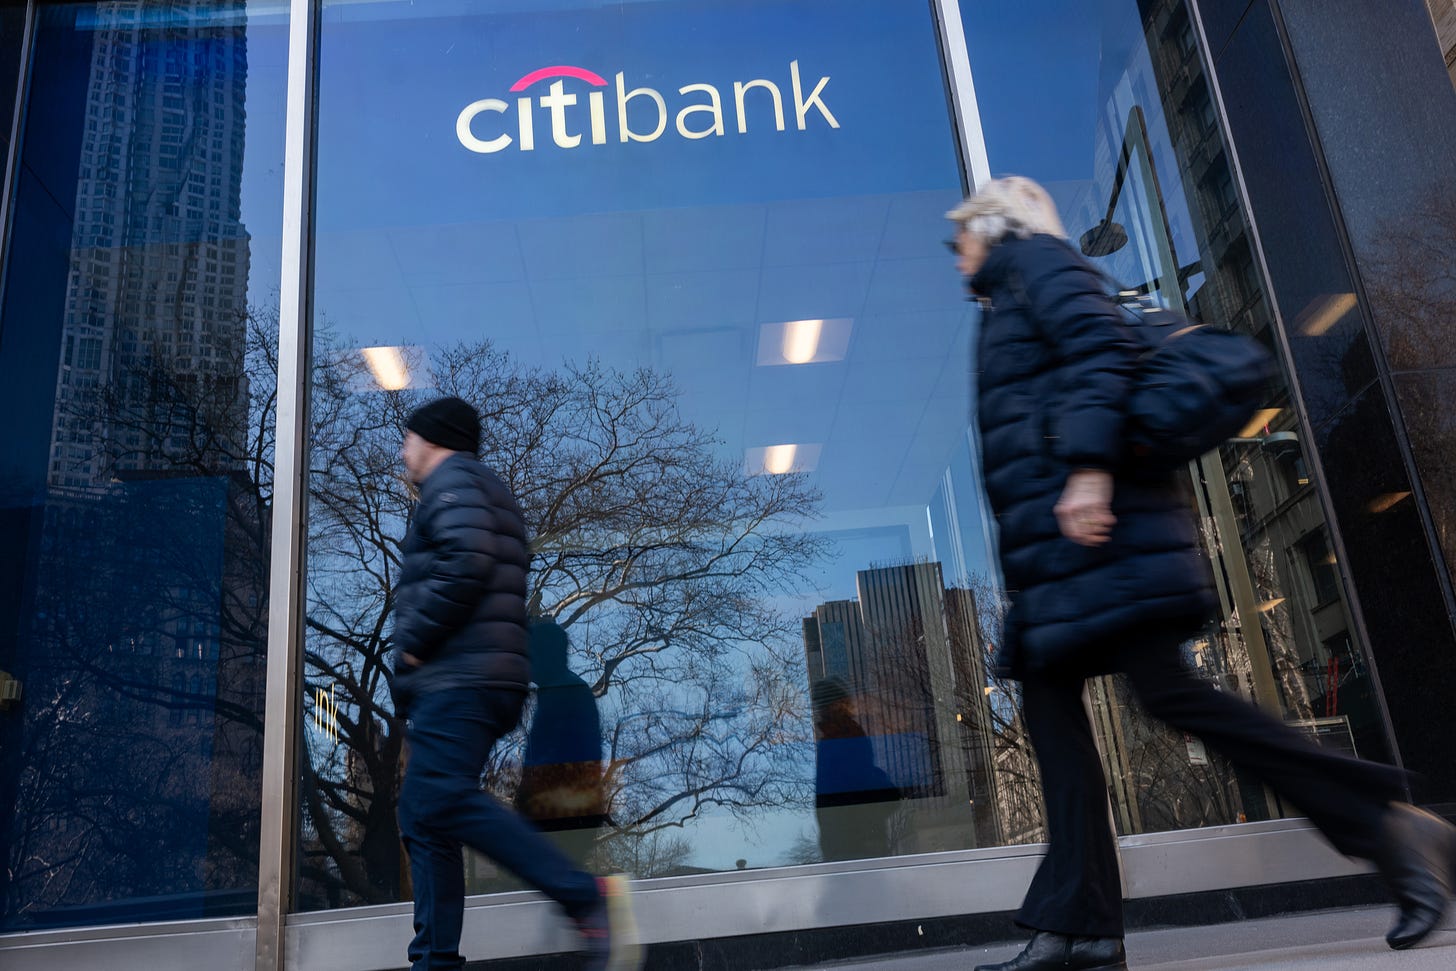 People walk by a CitiBank location in New York City on March 1. Credit: Spencer Platt/Getty Images